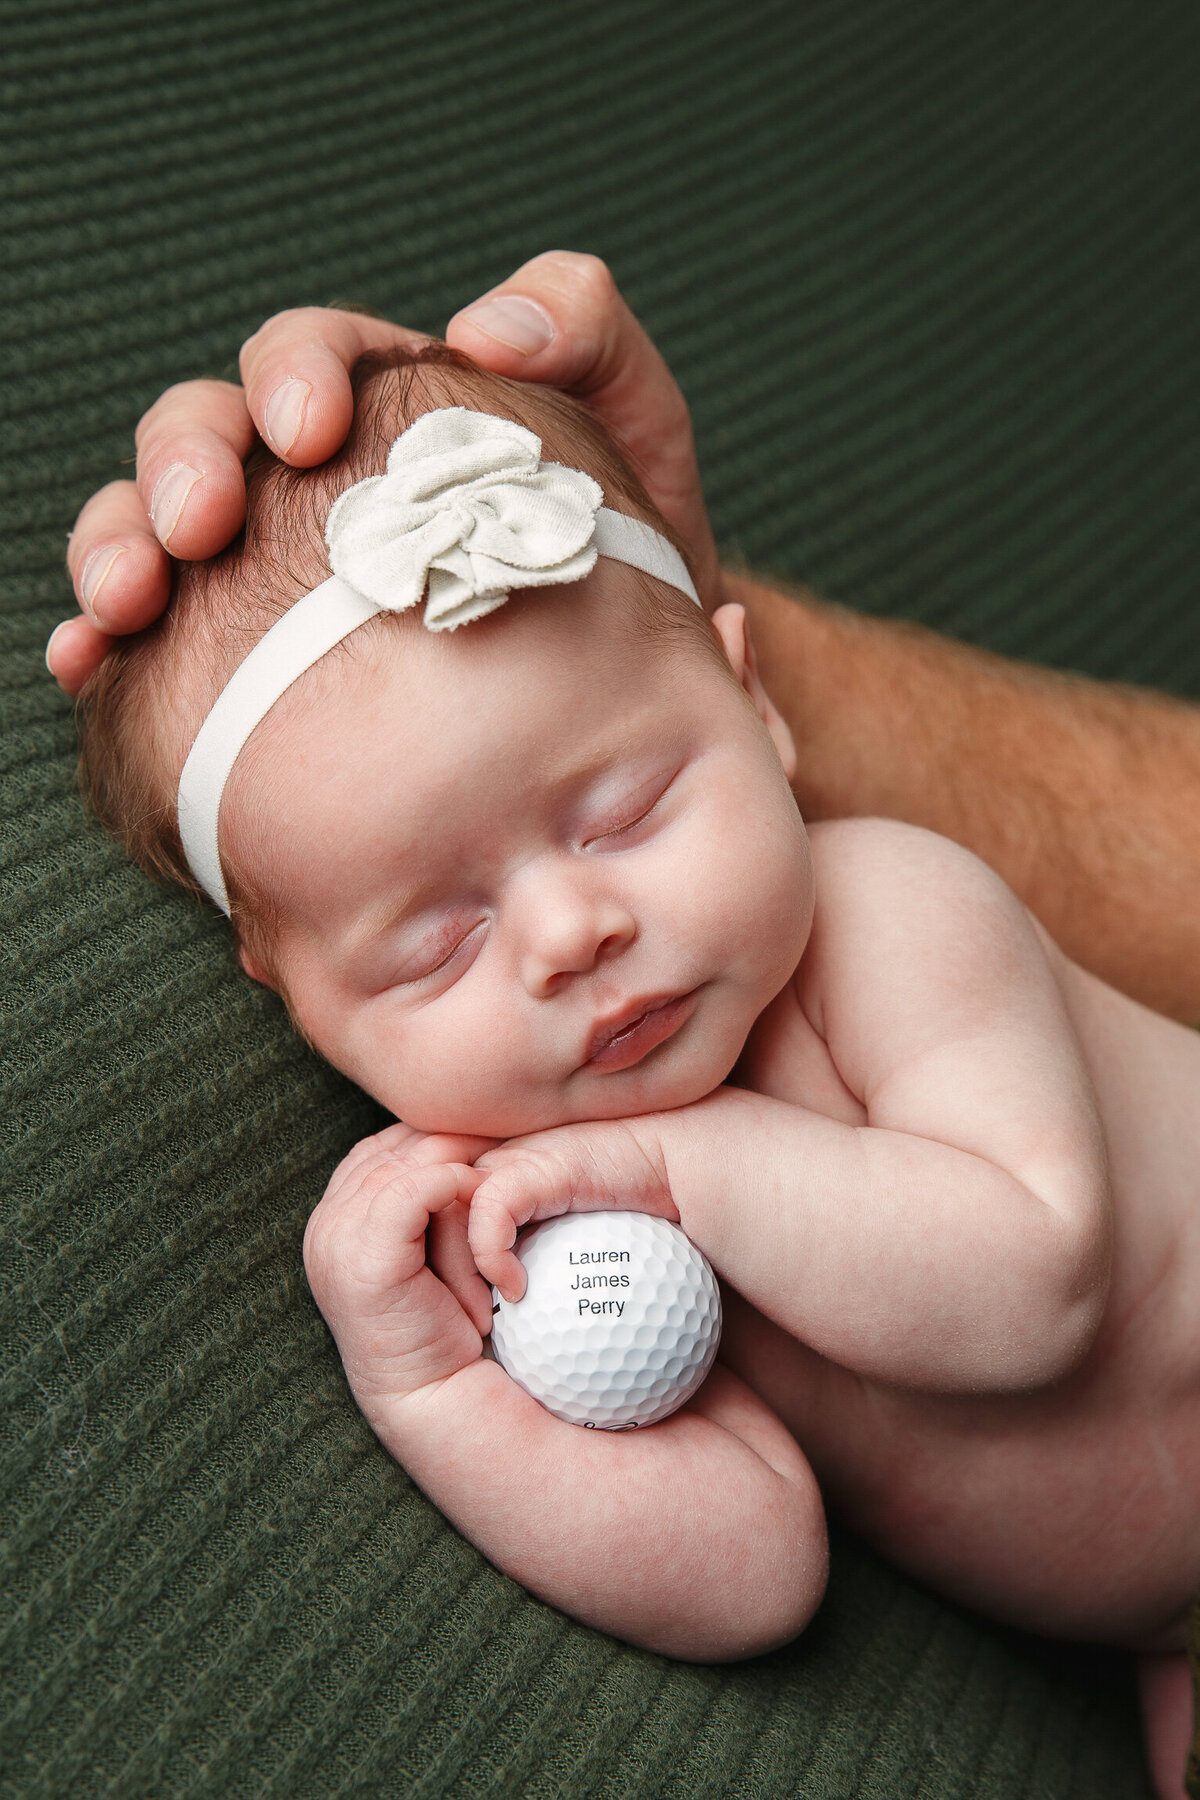 Portrait of an infant girl holding a golf ball and showing dad's hand on her head